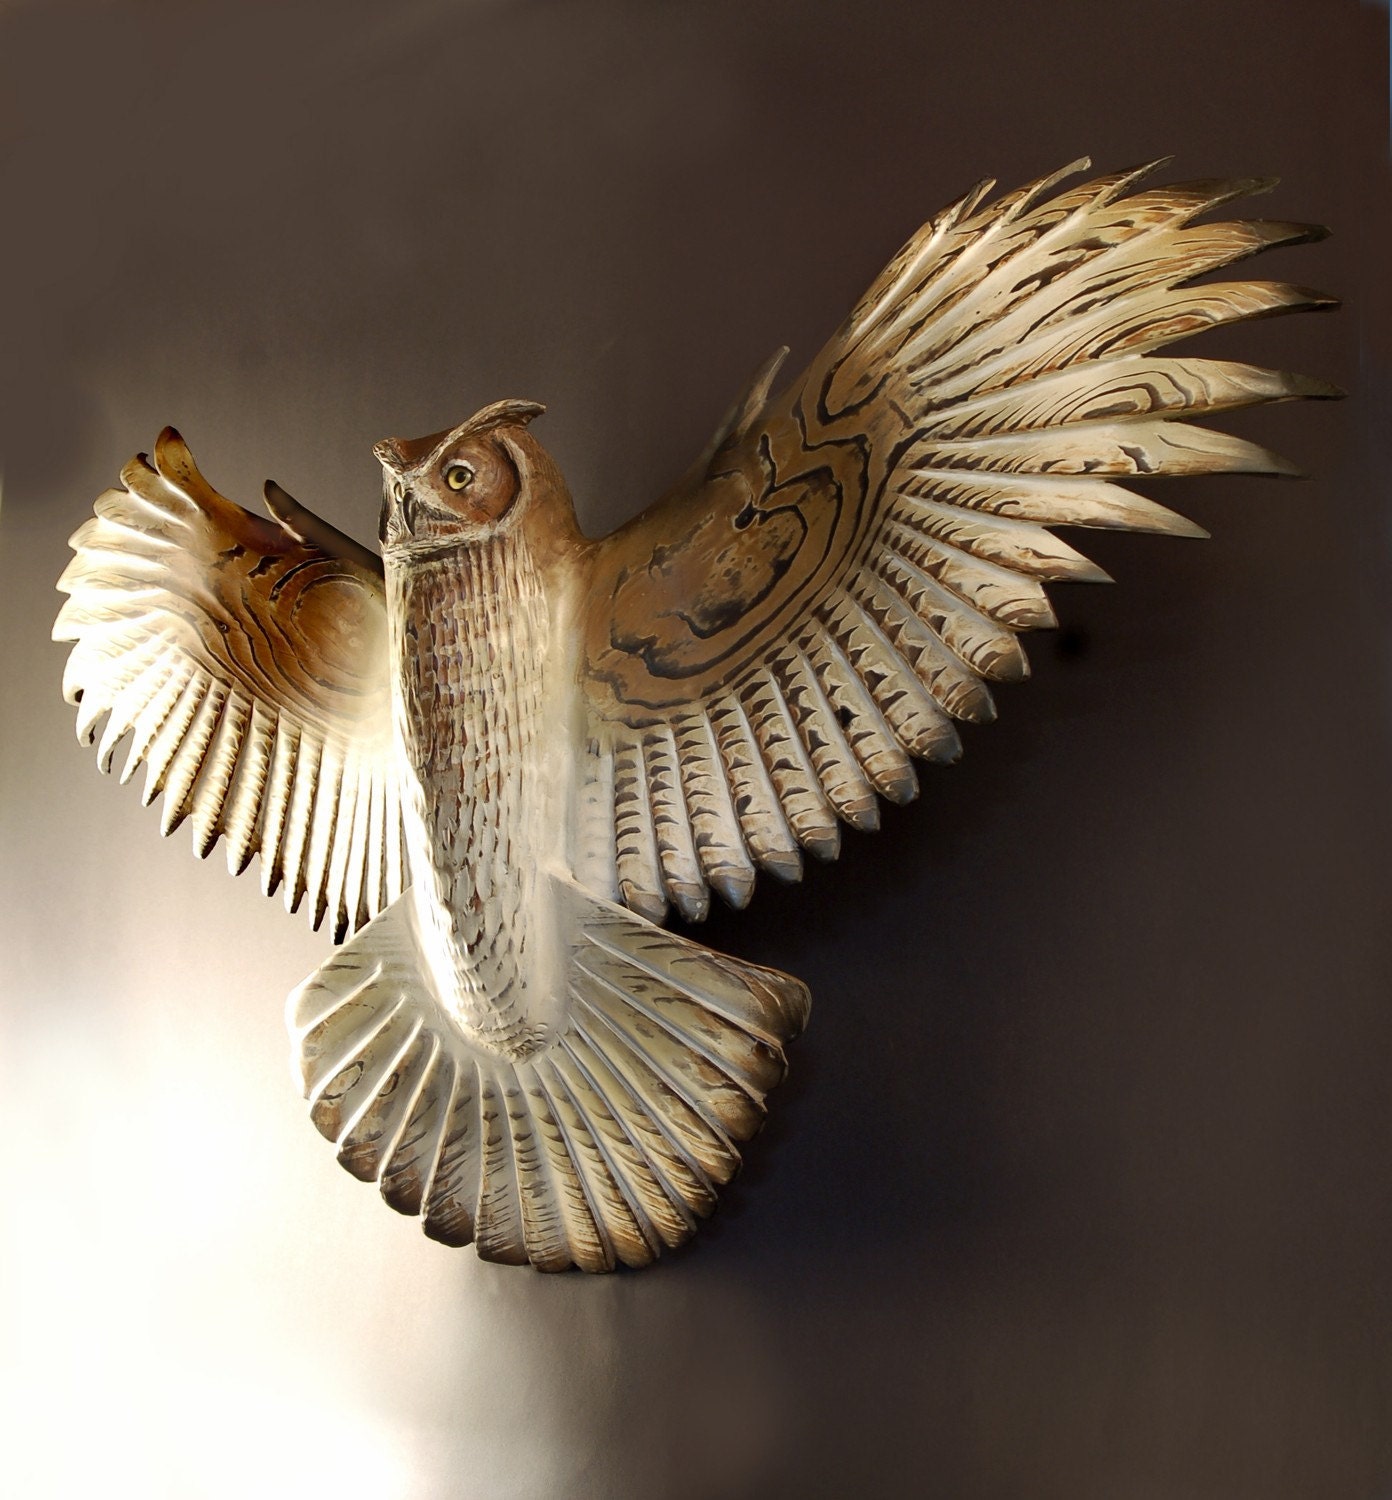 Owl Sculpture hand carved by Jason Tennant, Silent Flight, Owl woodcarving